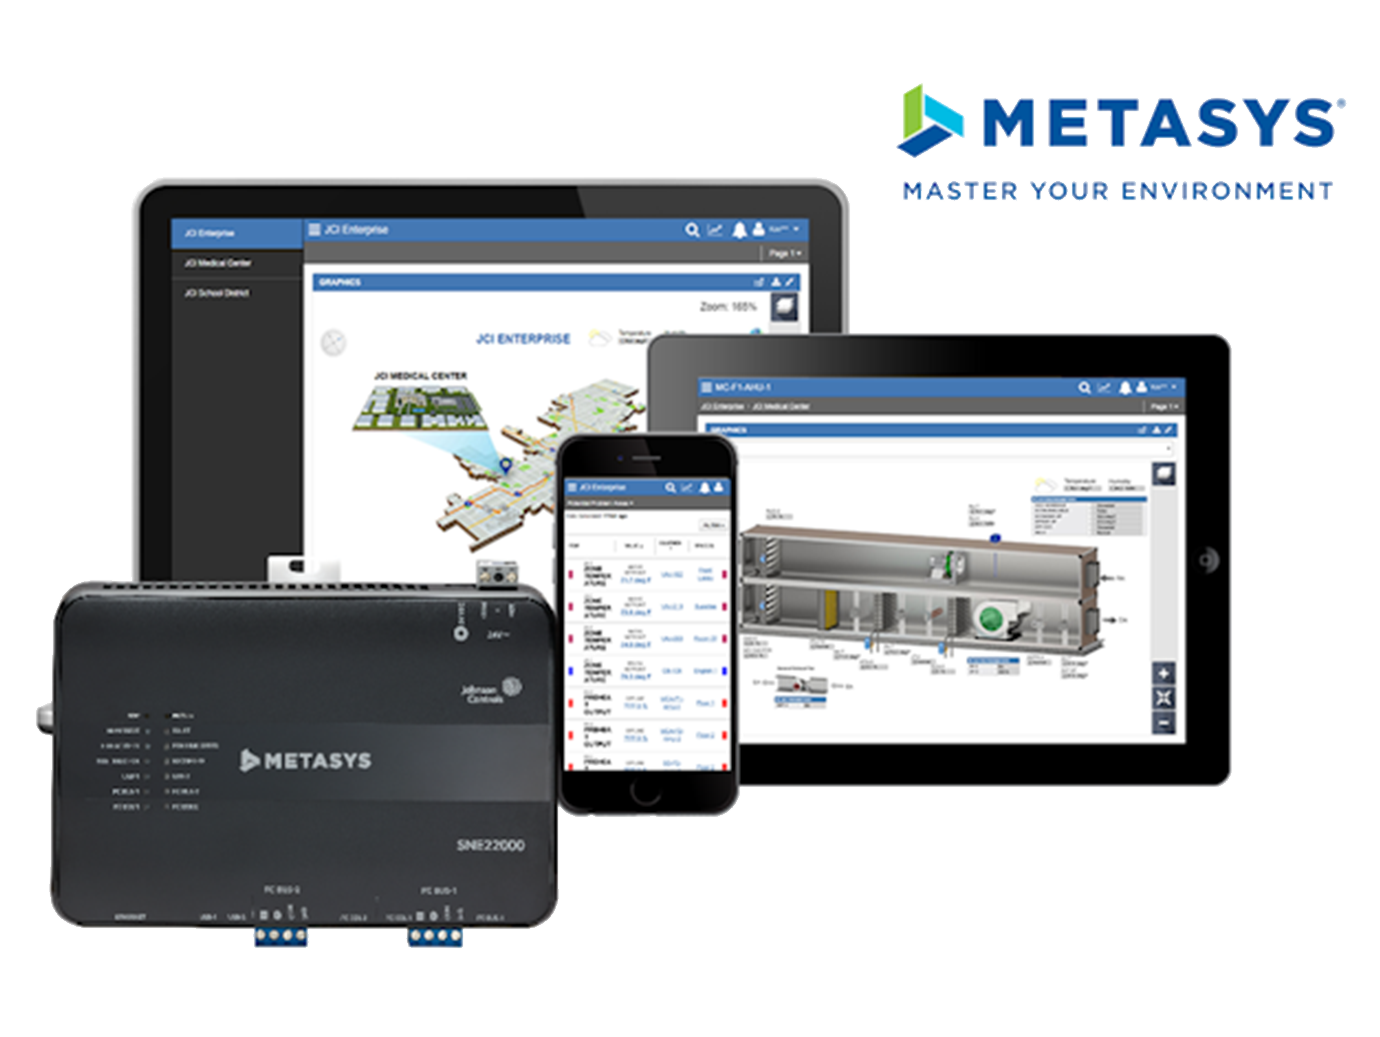 A Metasys device with a smartphone, tablet and laptop displaying the Metasys software